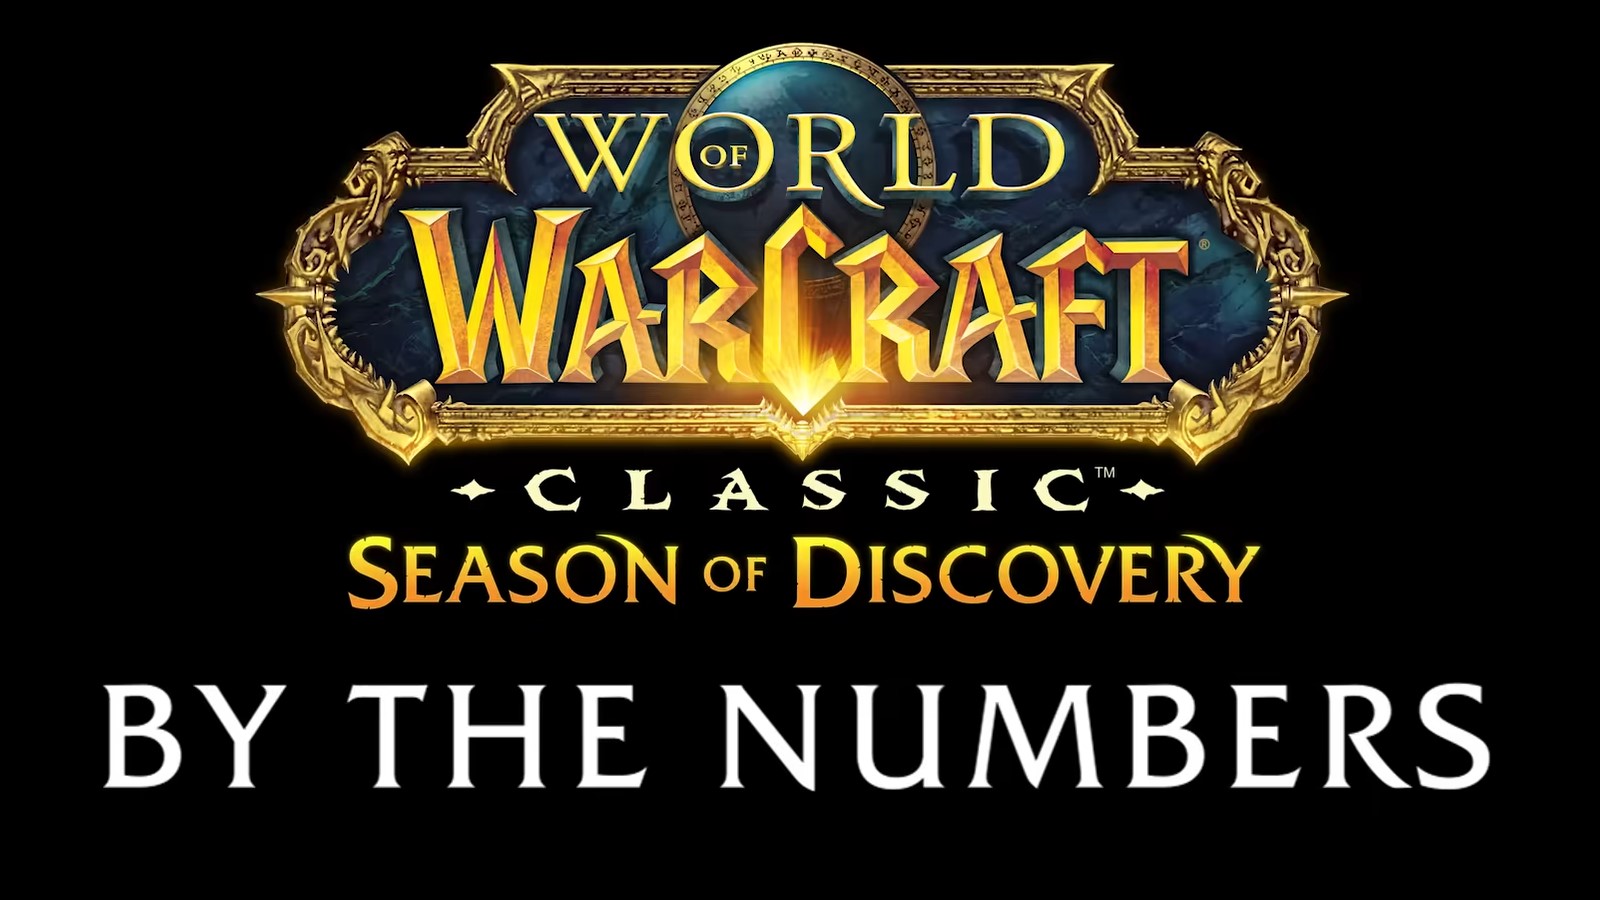 WoW reveals an incredible number of characters already created in the Season of Discovery